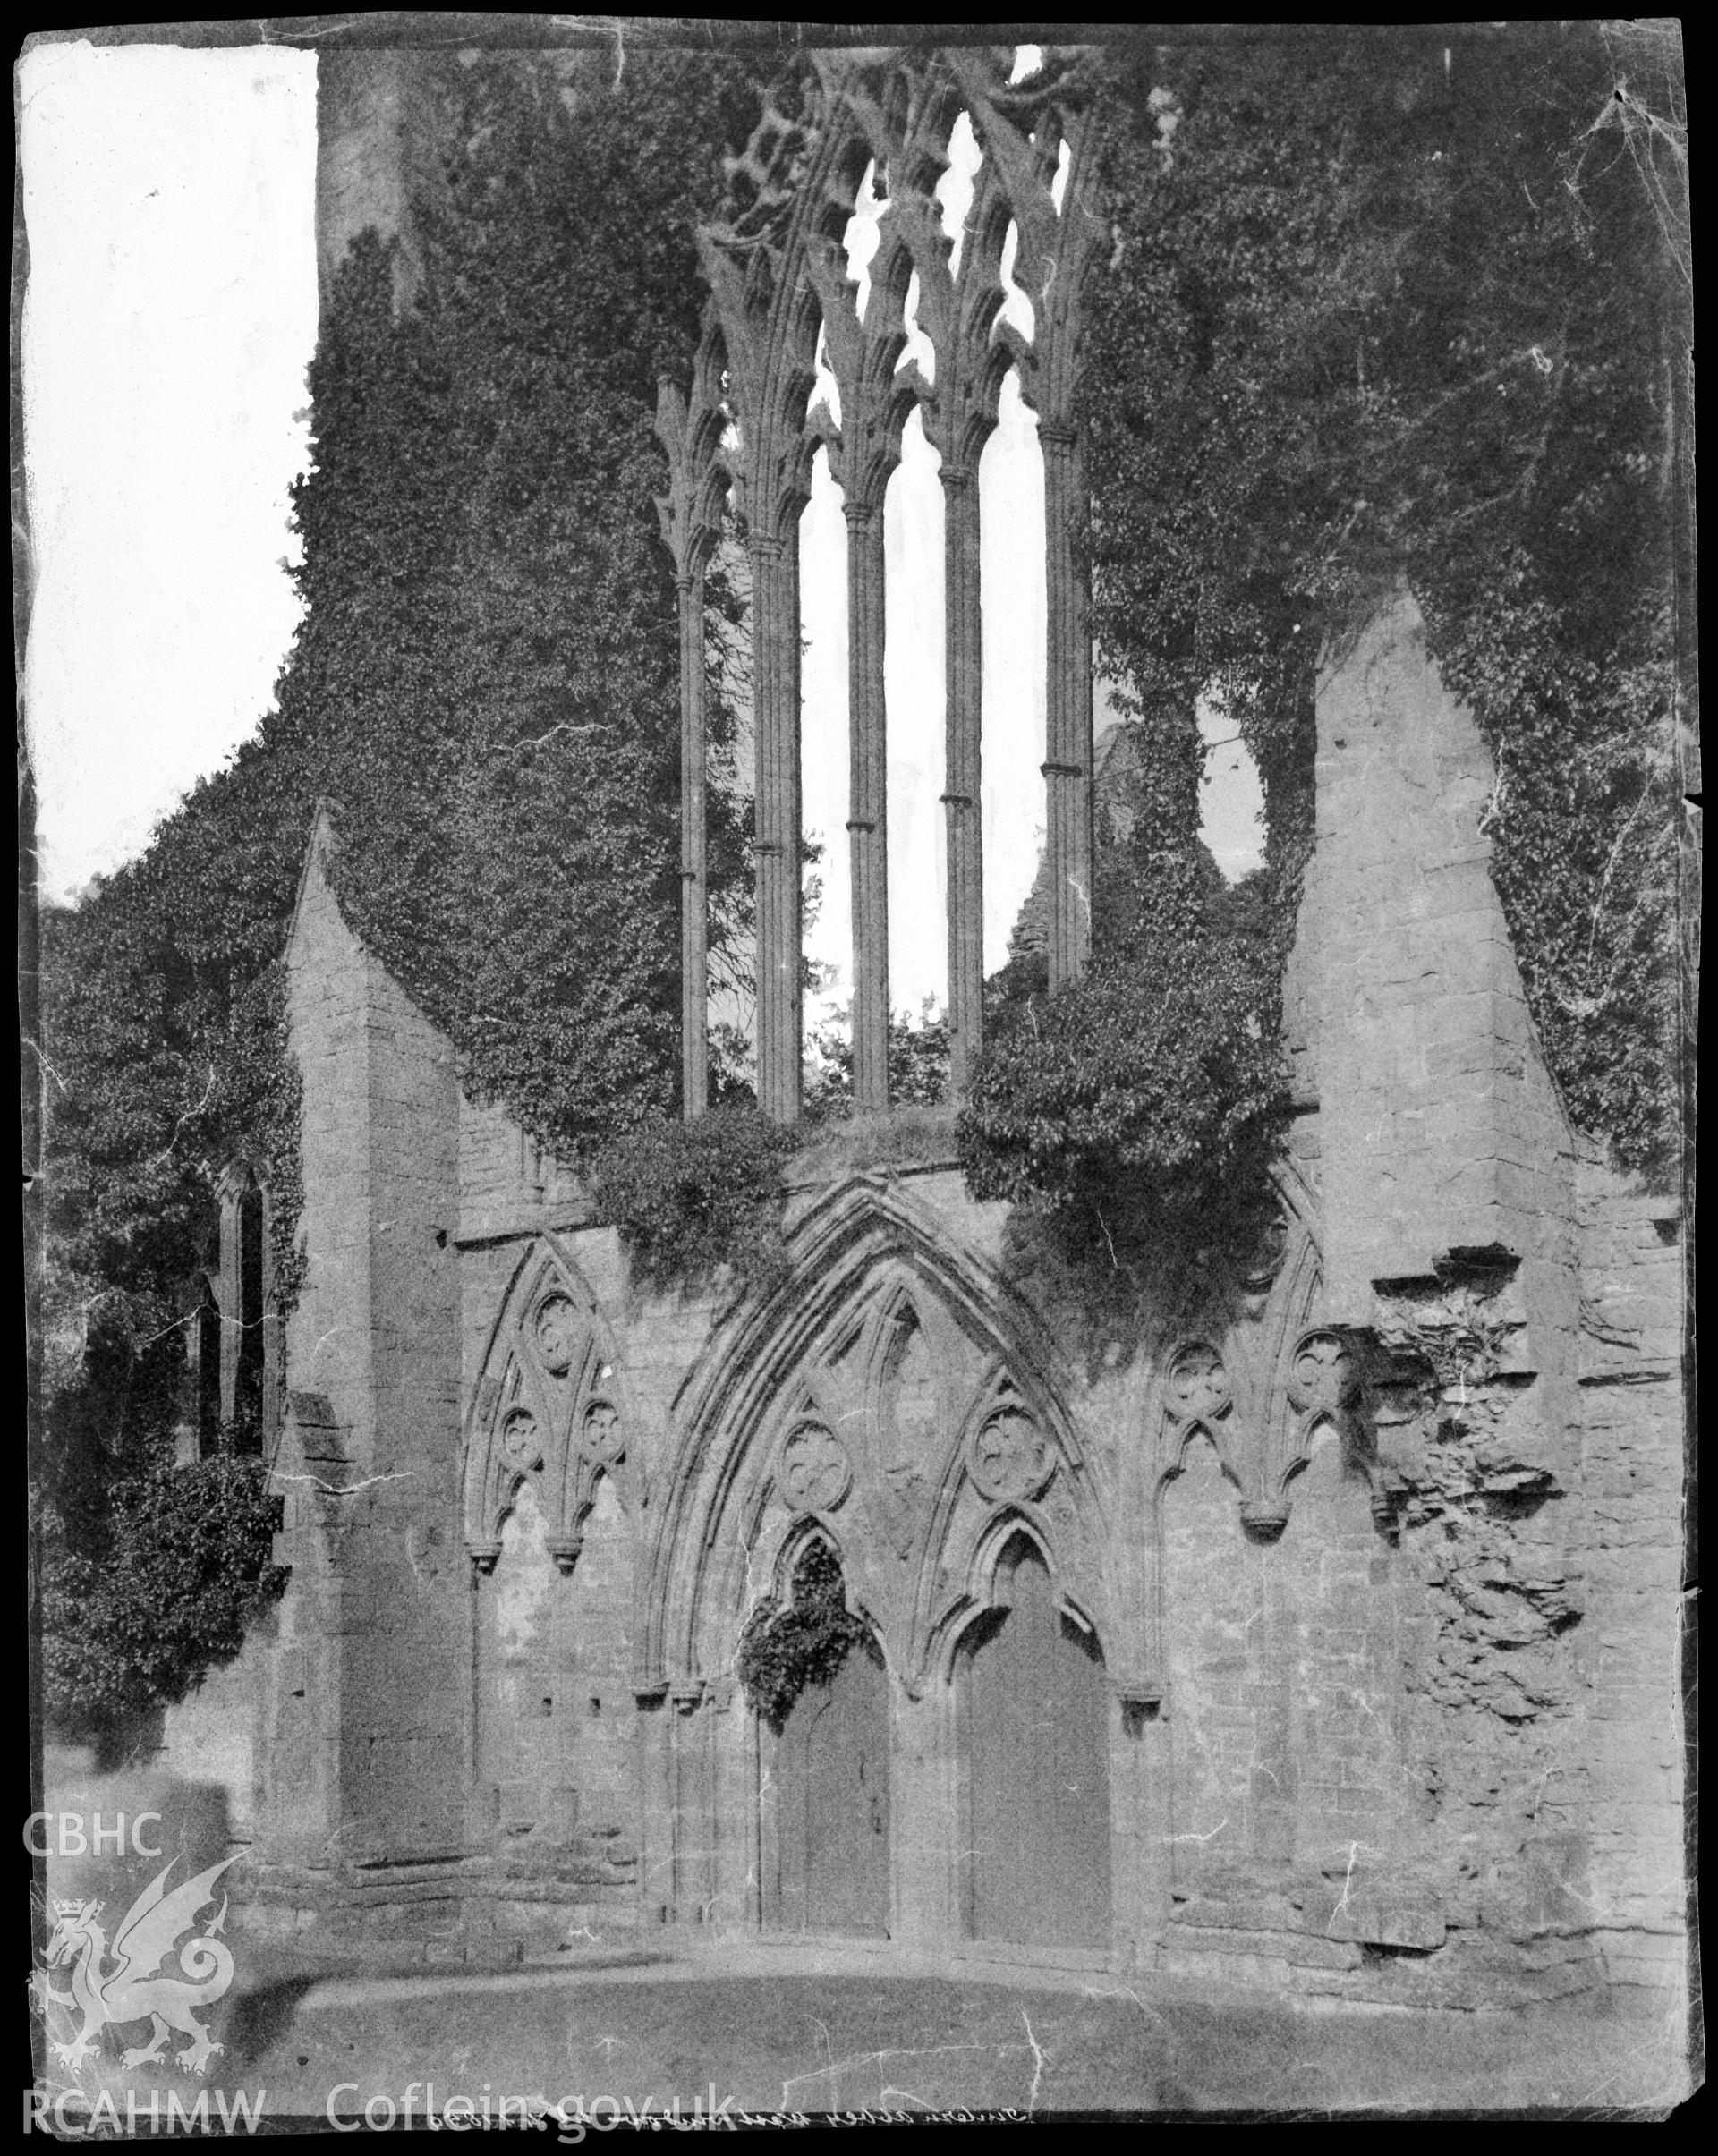 Tintern Abbey. Copy negative BB75/2629. No accession number